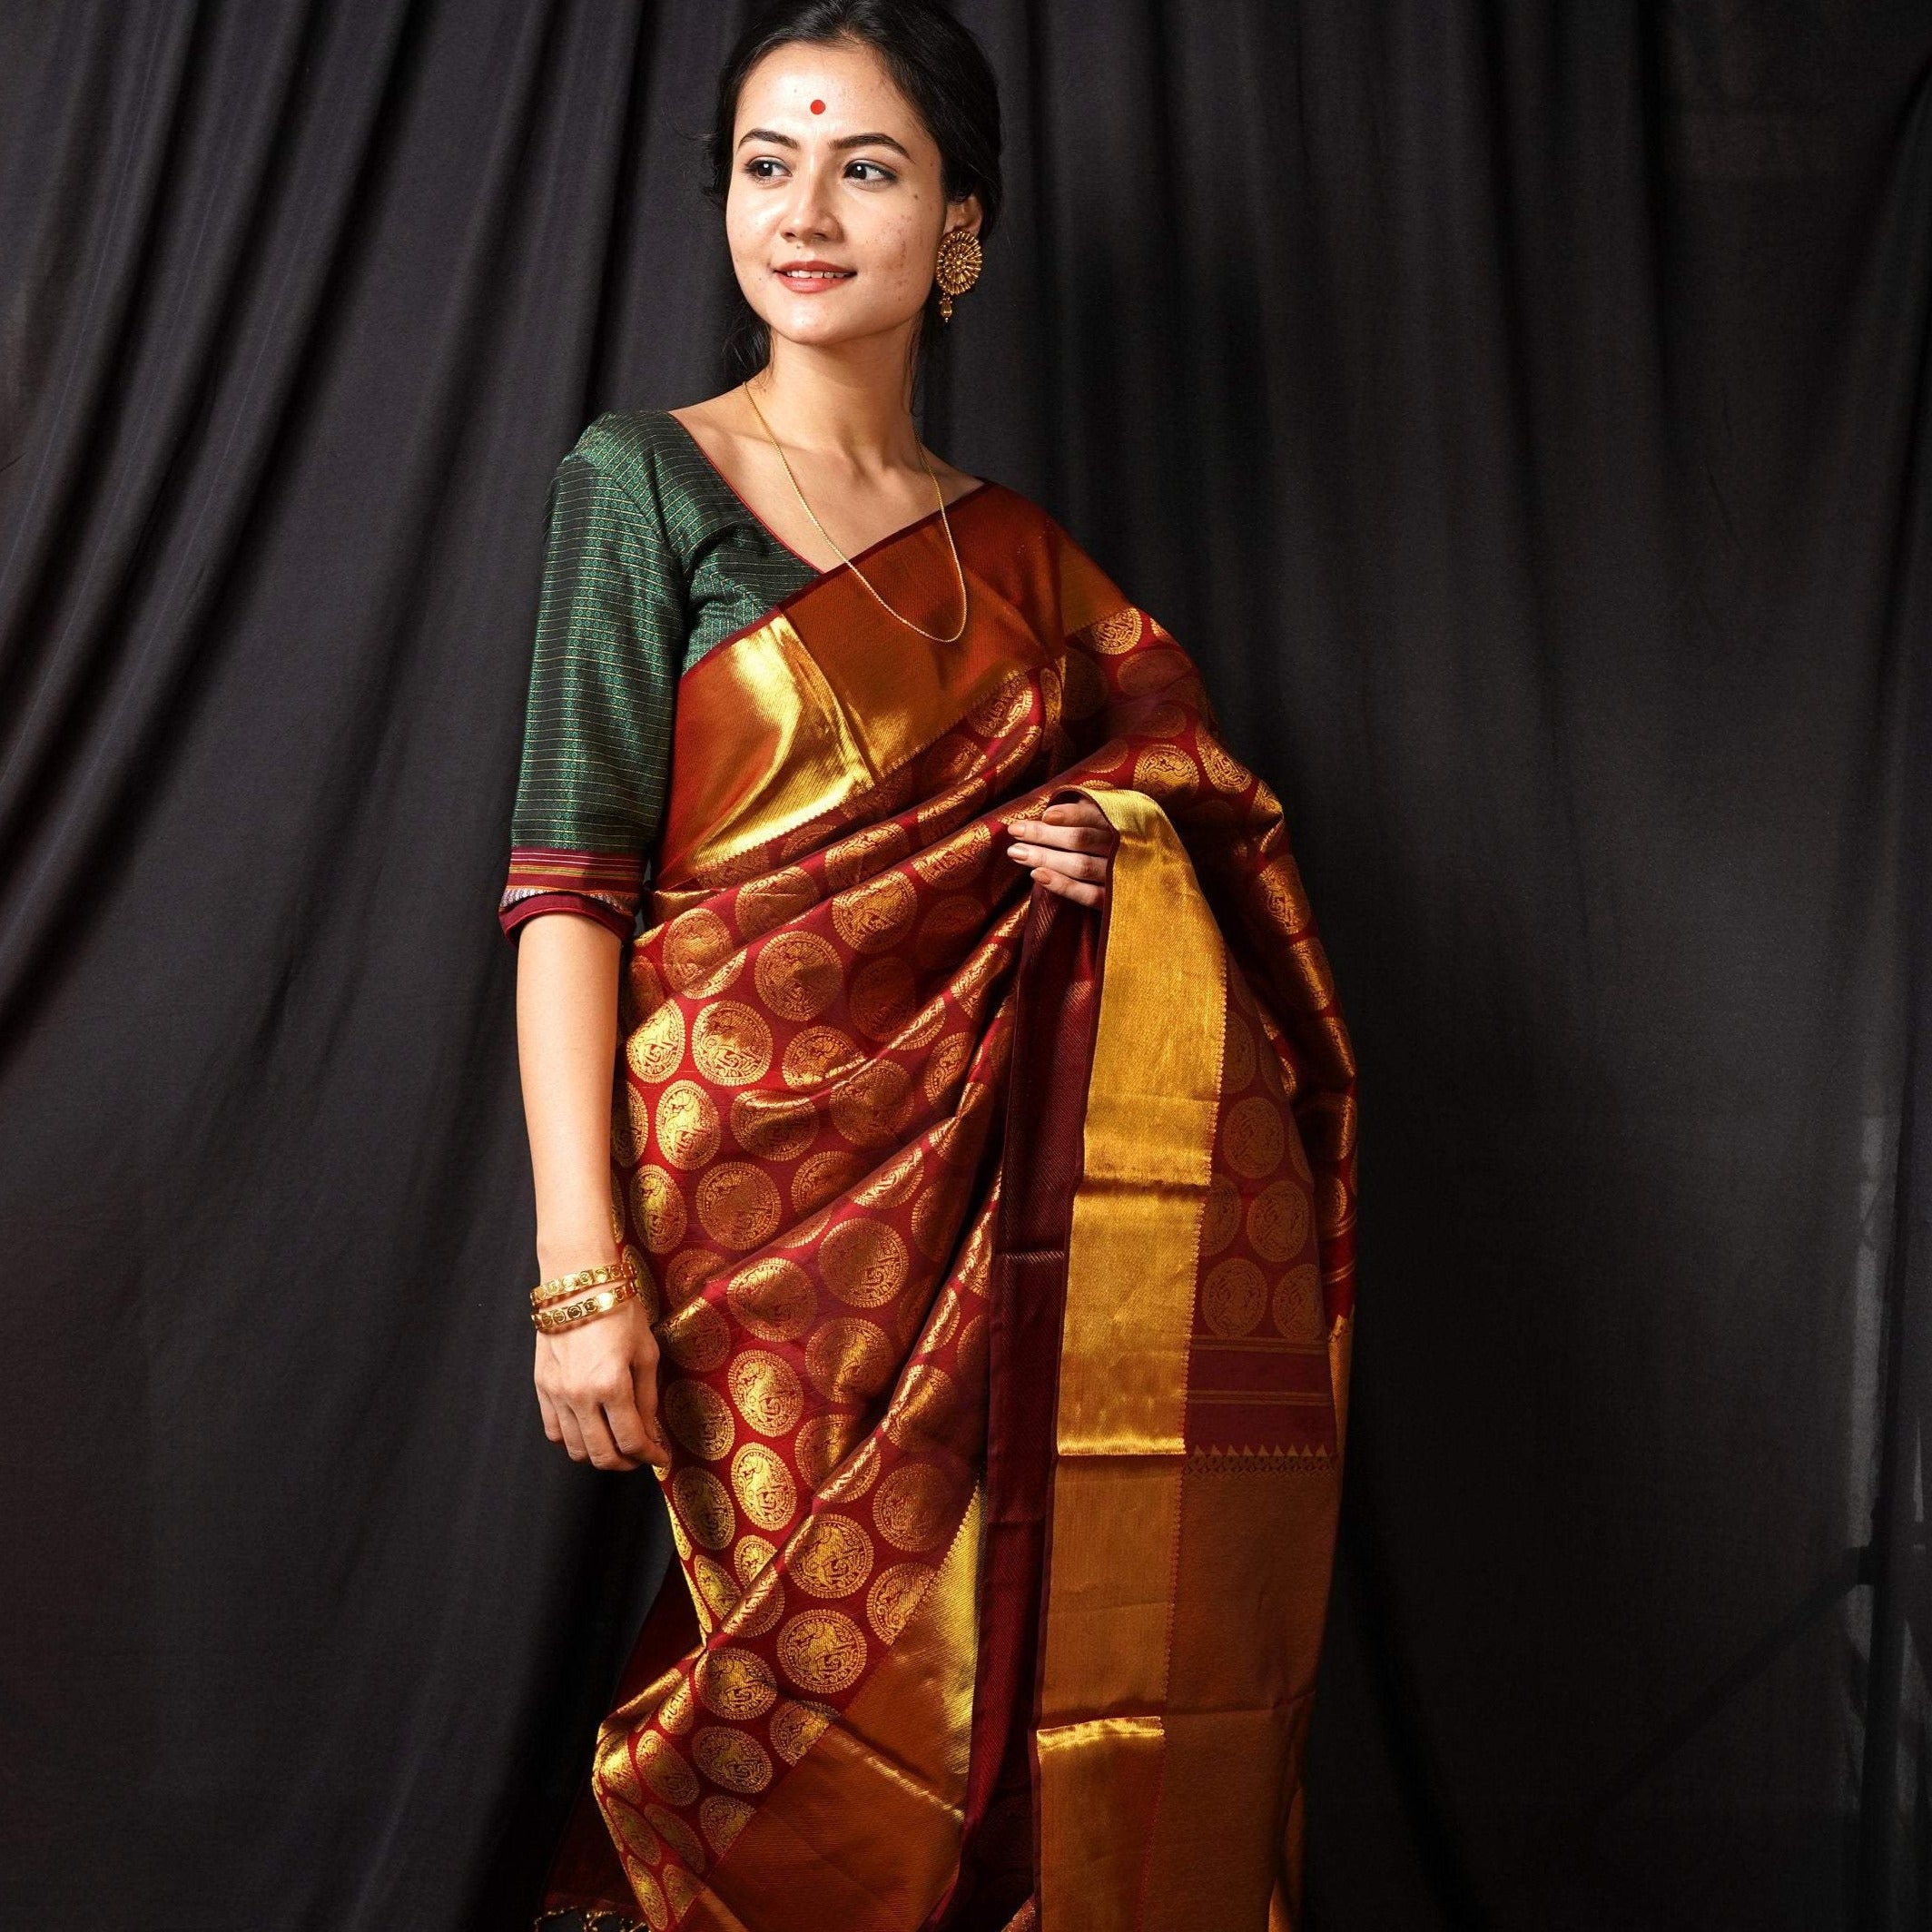 Plain Maroon Color Indian Kanchipuram Soft Silk Weaving Saree With Contrast  Matching White Blouse. - Etsy